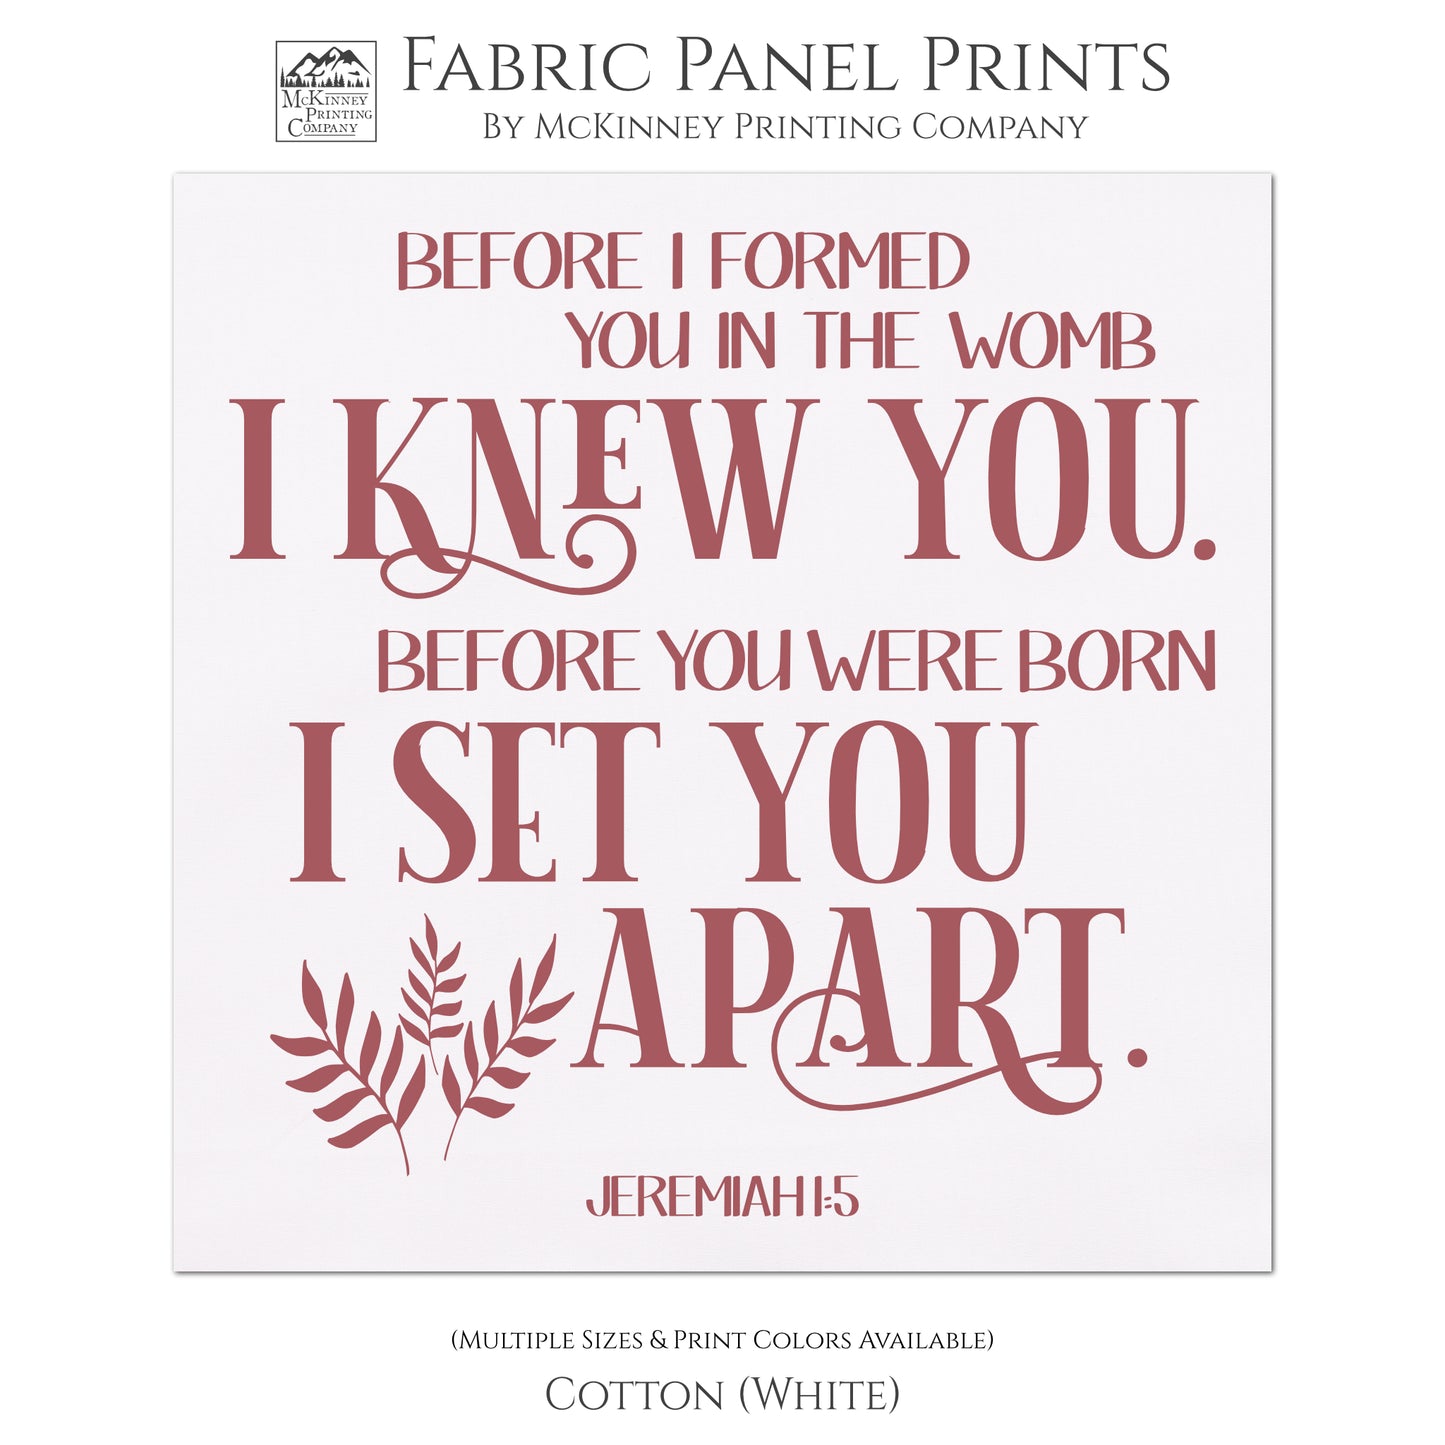 Before I formed you in the womb I knew you. Before you were born I set you apart. - Jeremiah1:5, Quilt Block, Fabric Panel Print - Cotton, White